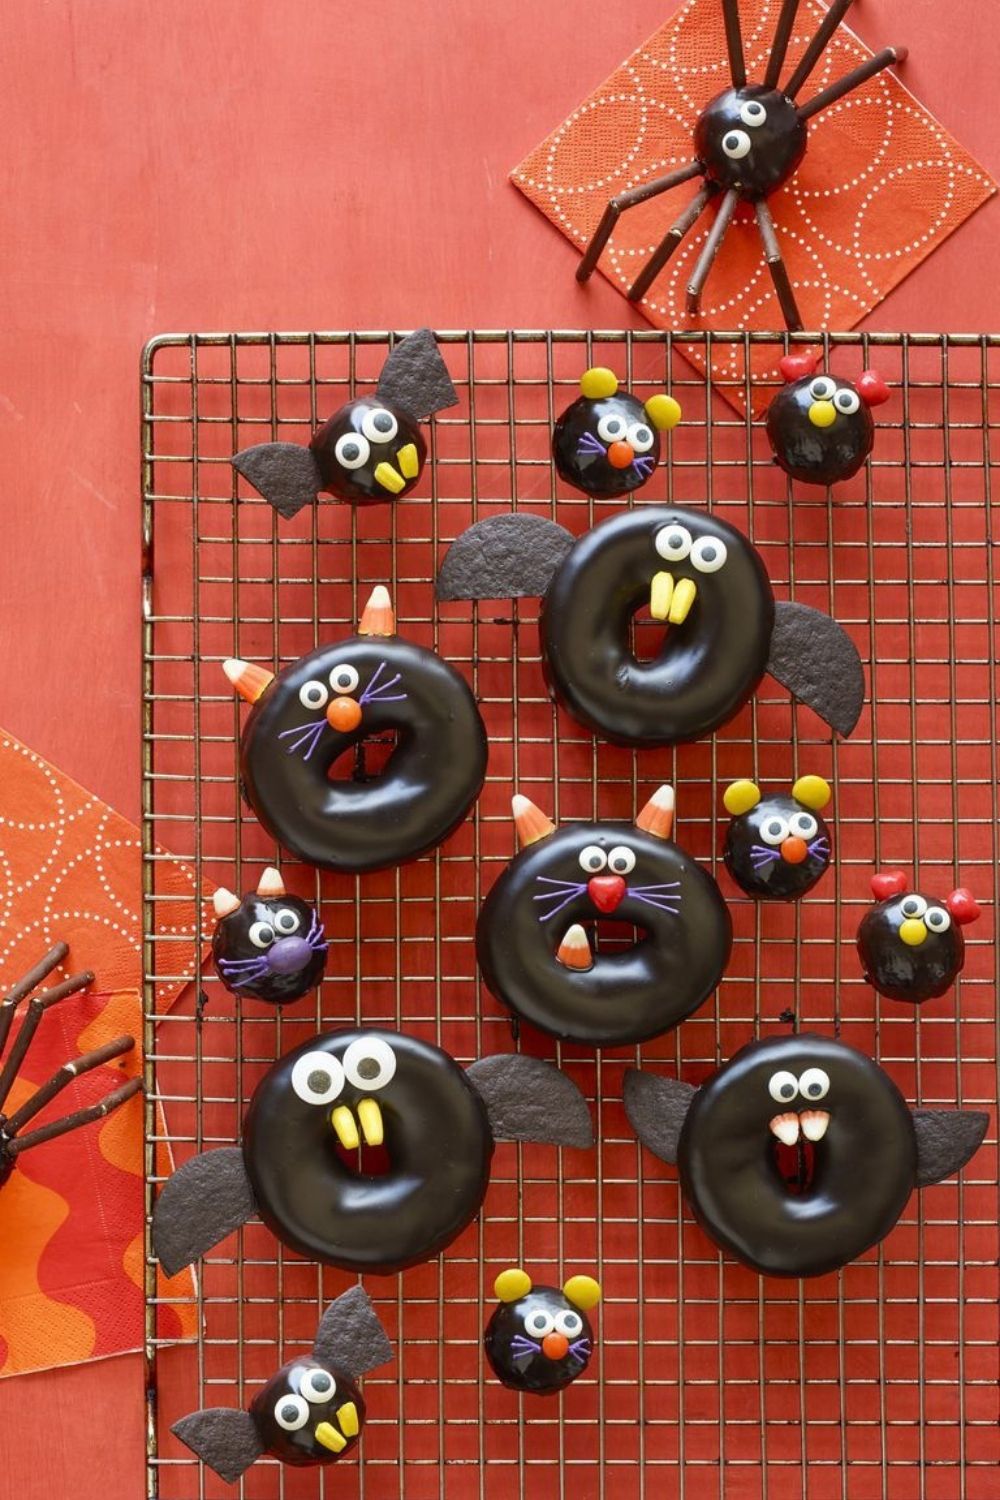 32 DIY Halloween food ideas for parties 2021 suitable for kids and adults